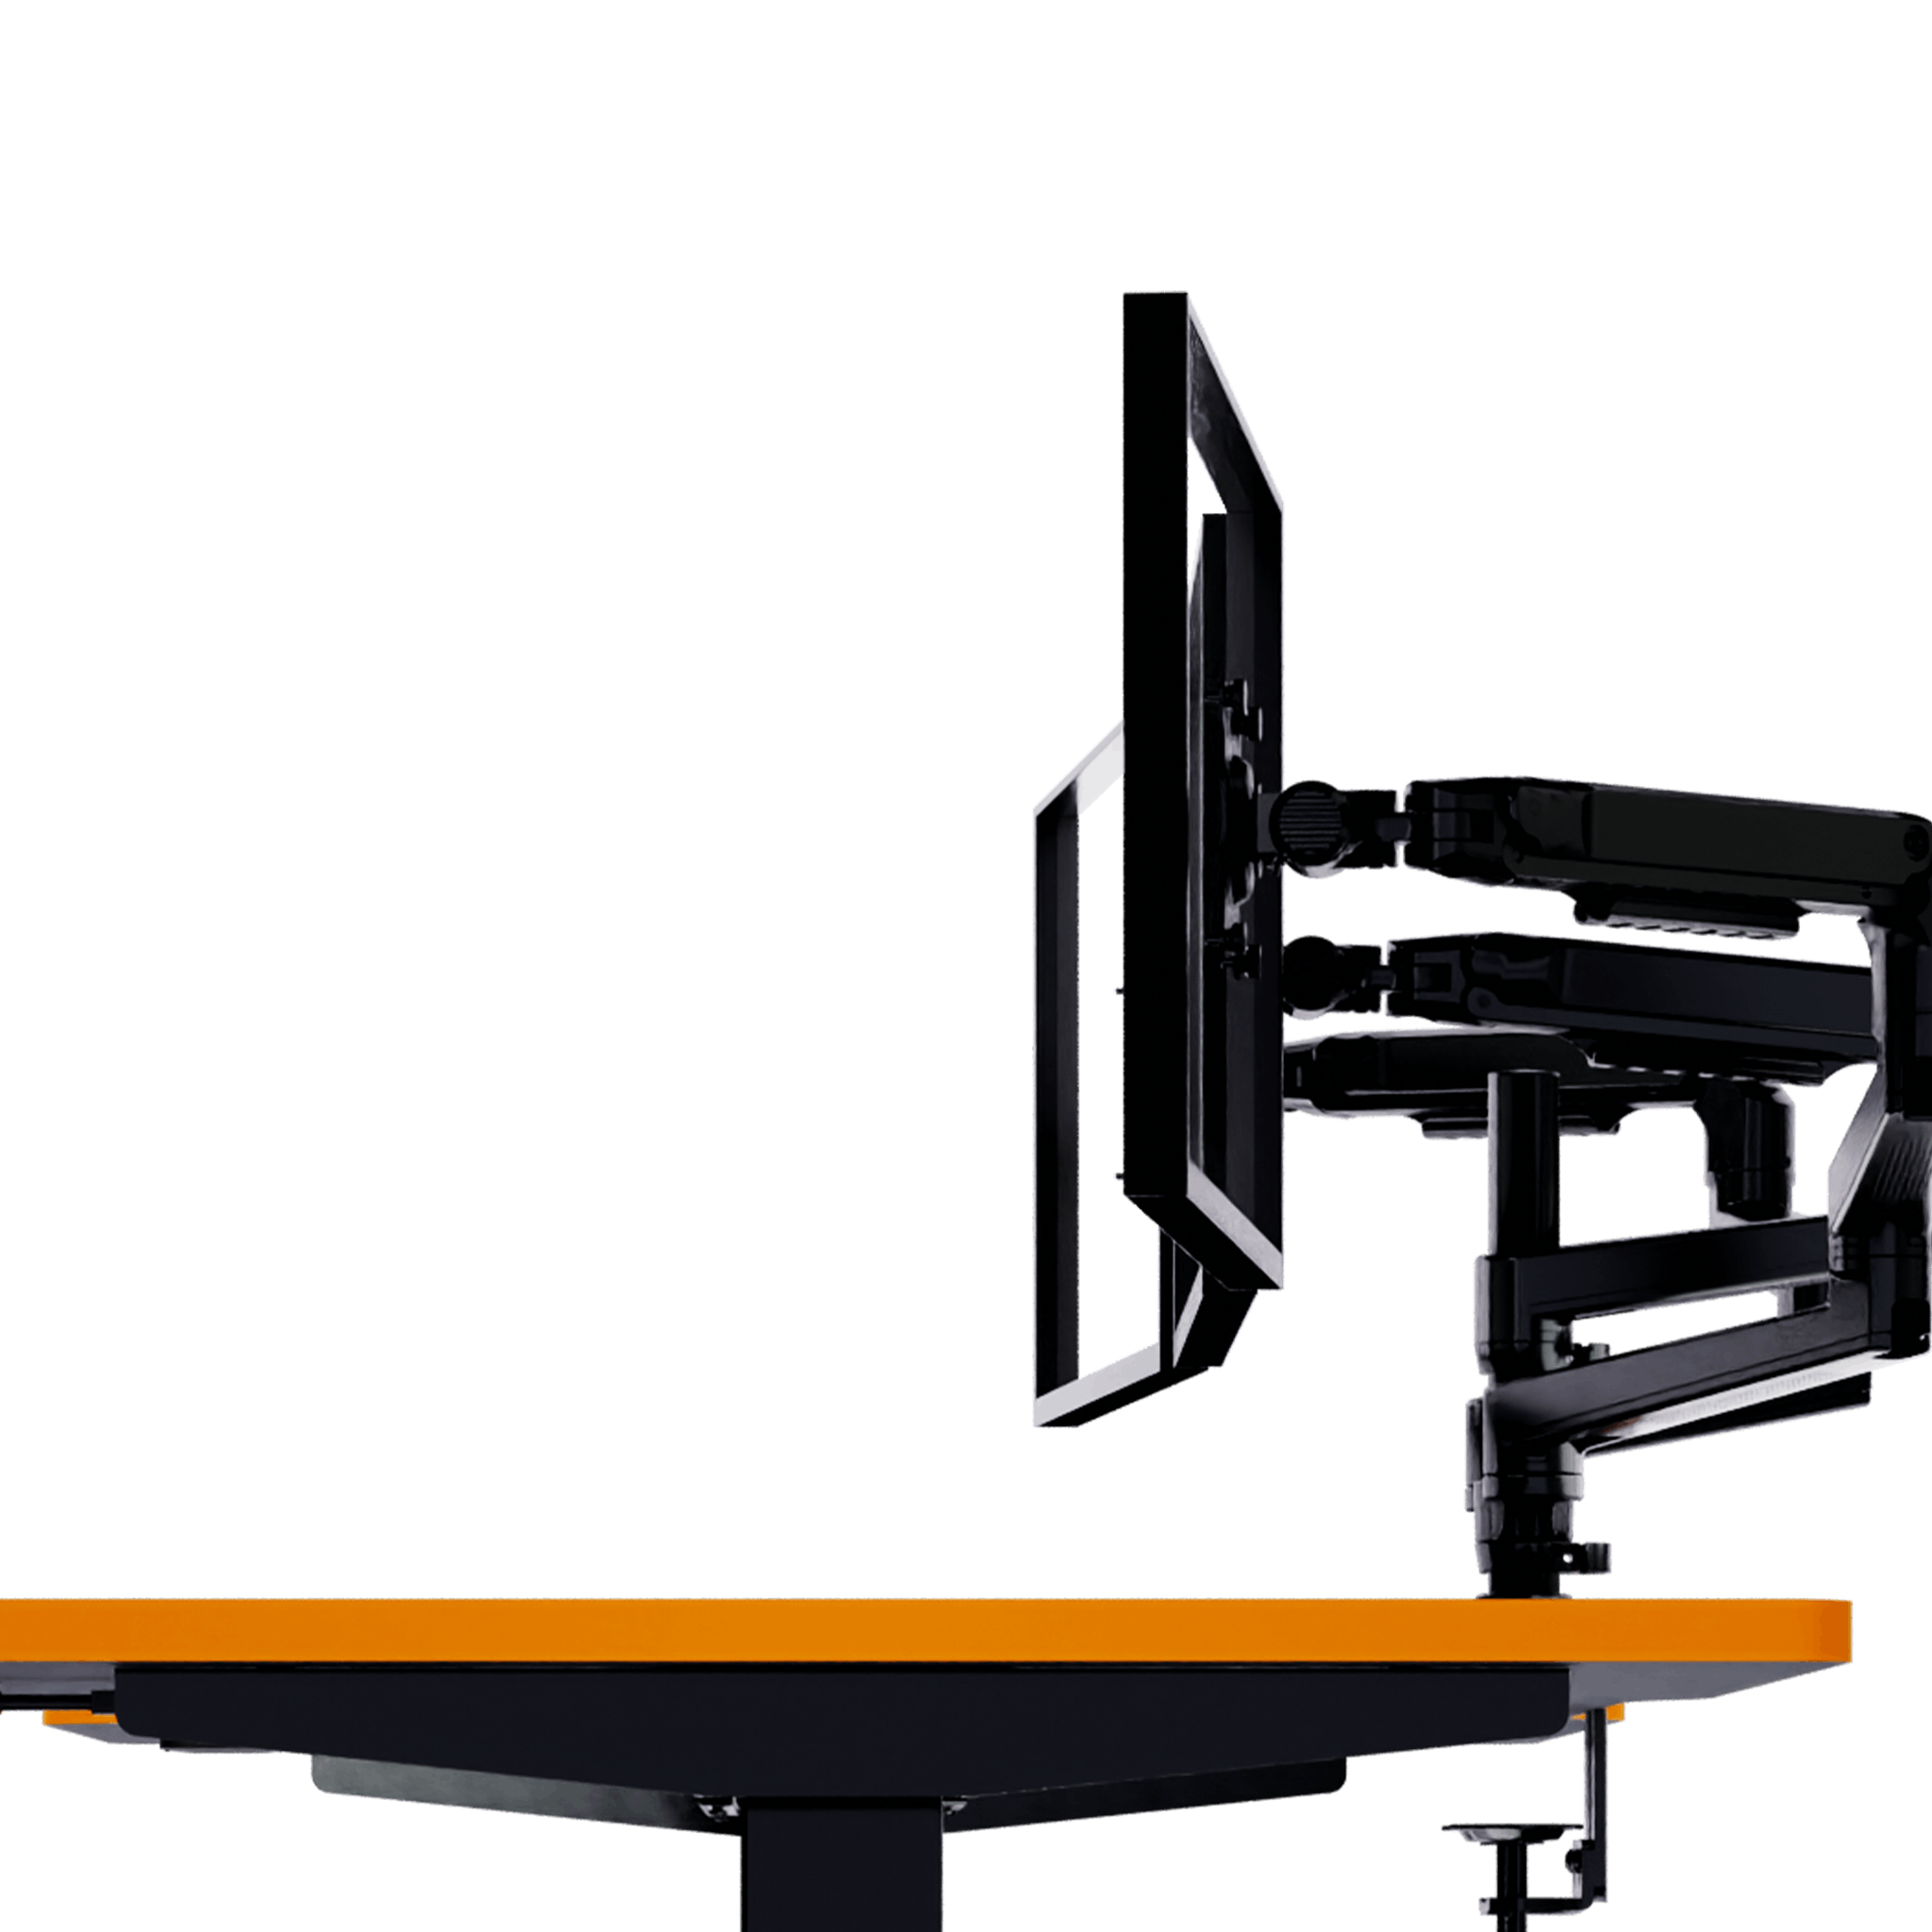 A triple monitor arm mount from LeetDesk offers many new possibilities for gaming, streaming, and working